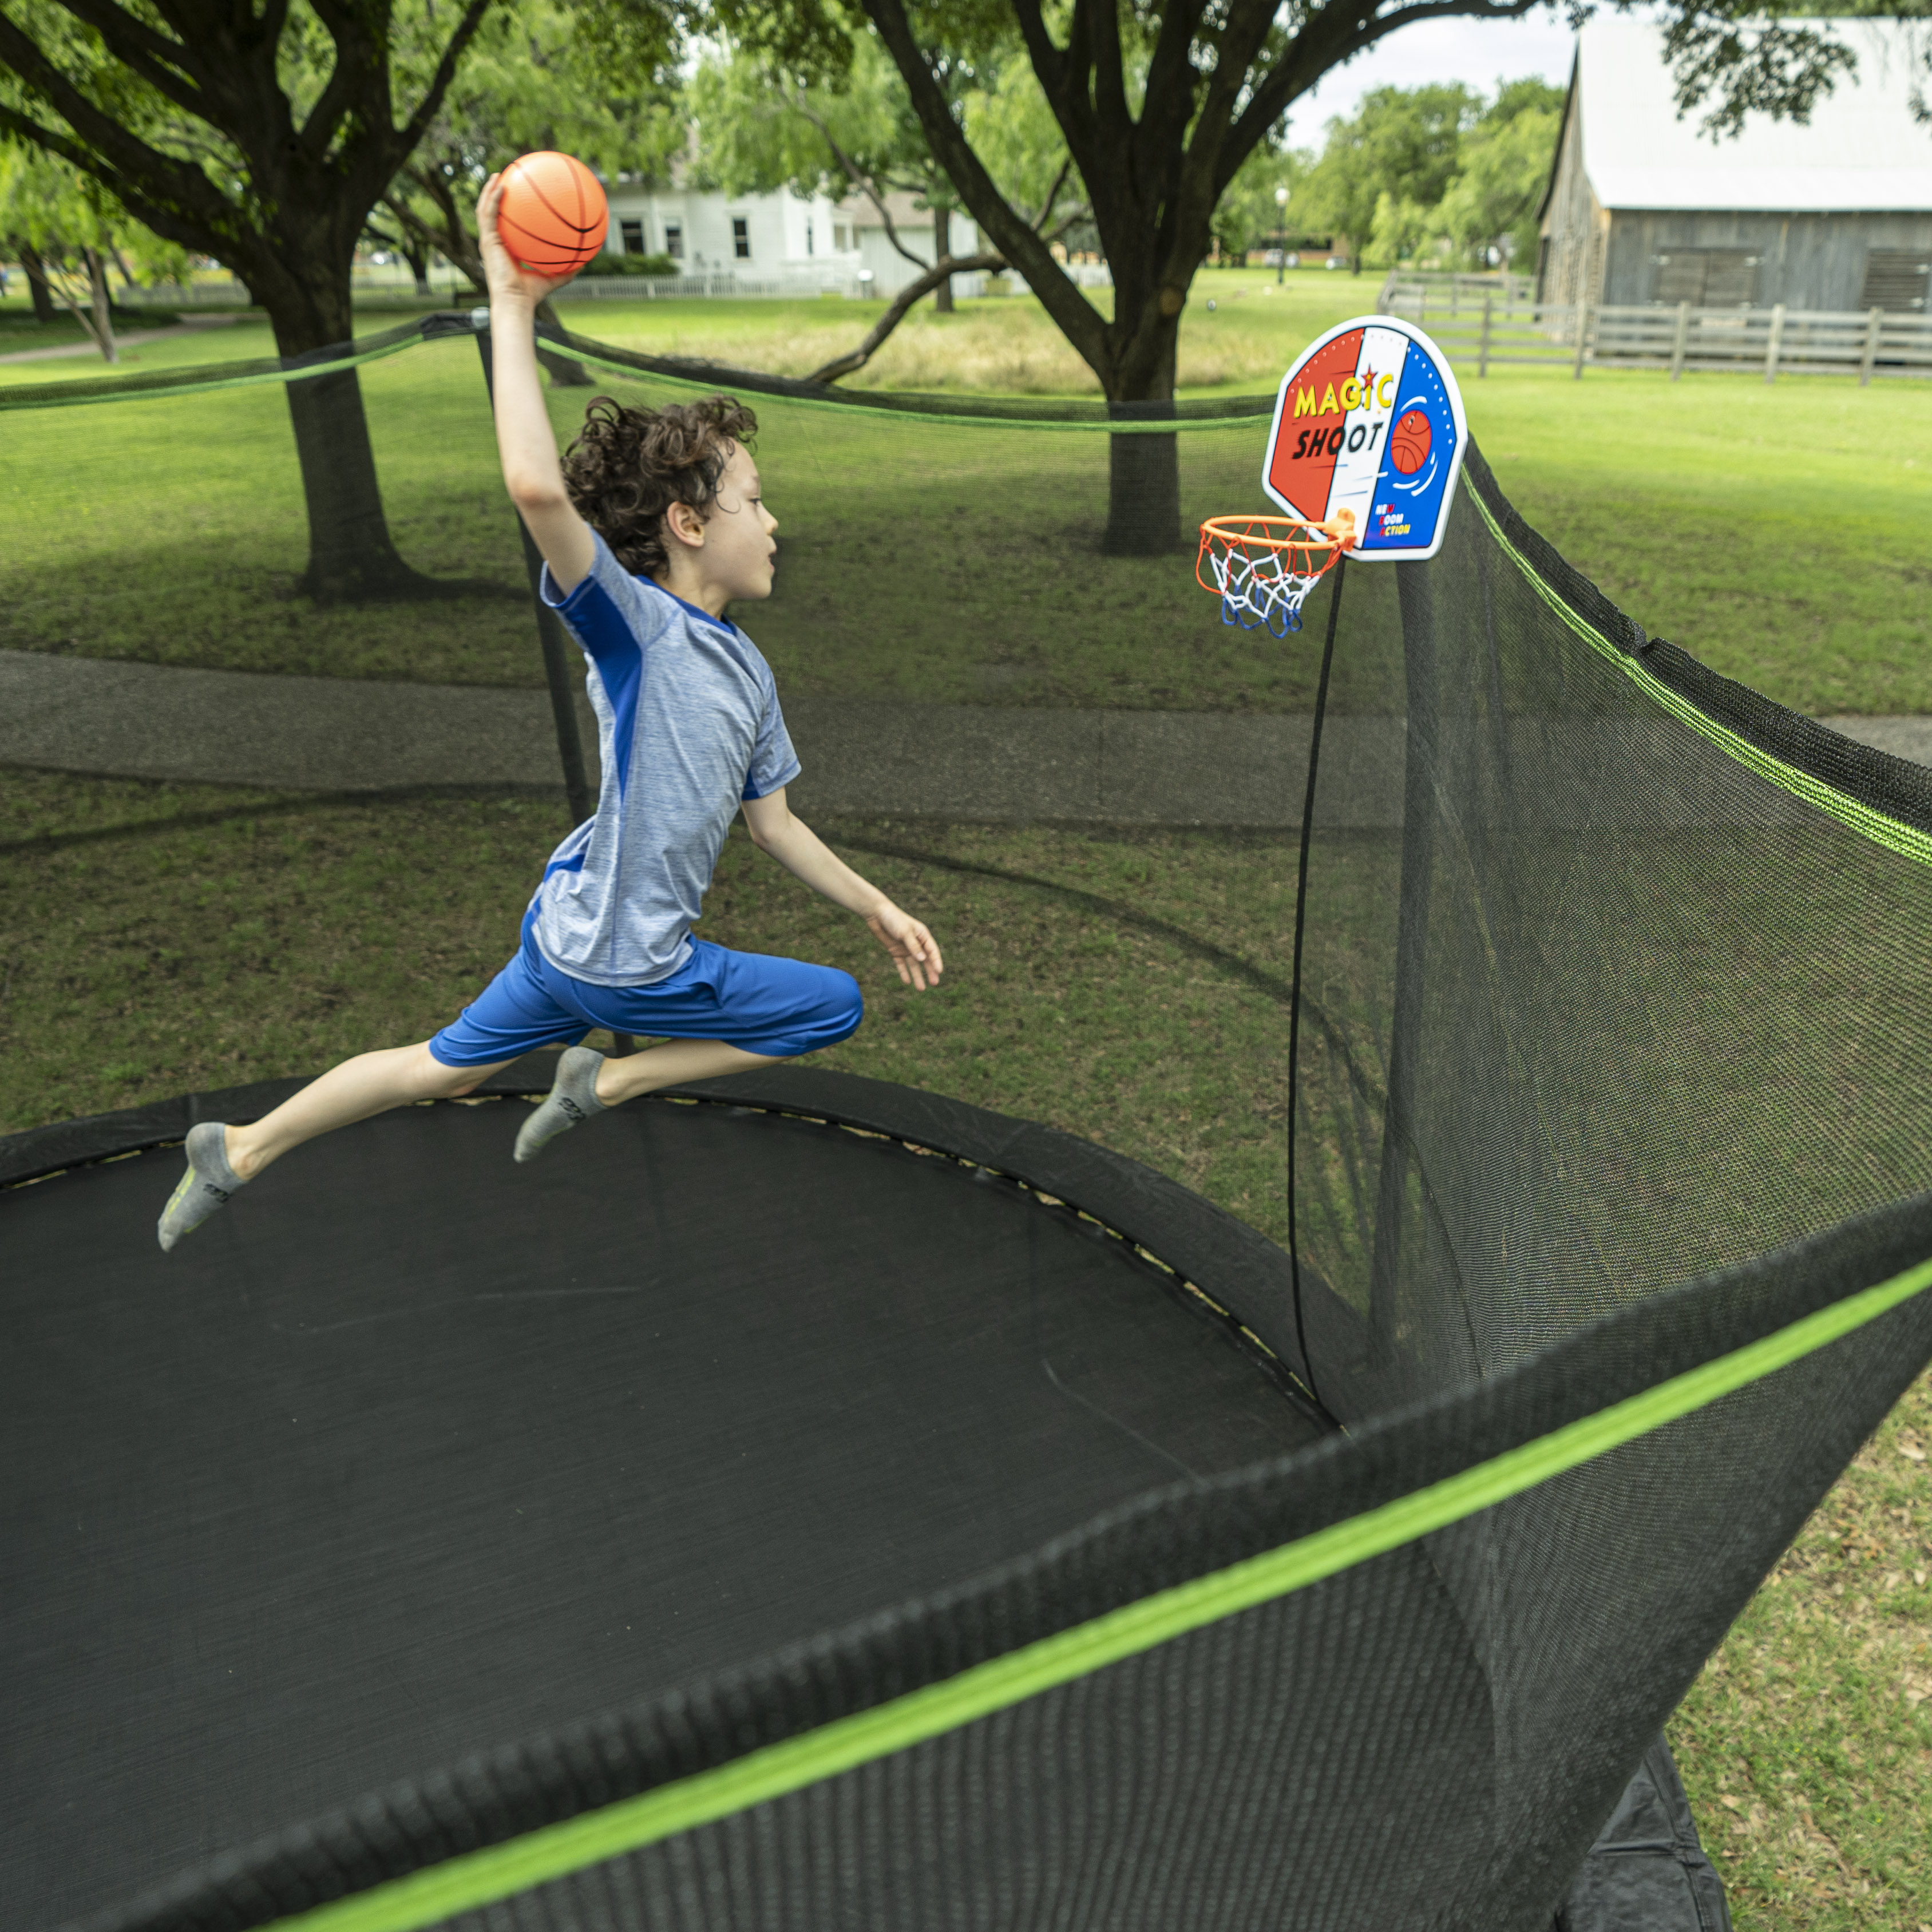 Jump King 14ft Trampoline With Basketball Hoop, Safety Enclosure, Green - image 5 of 10